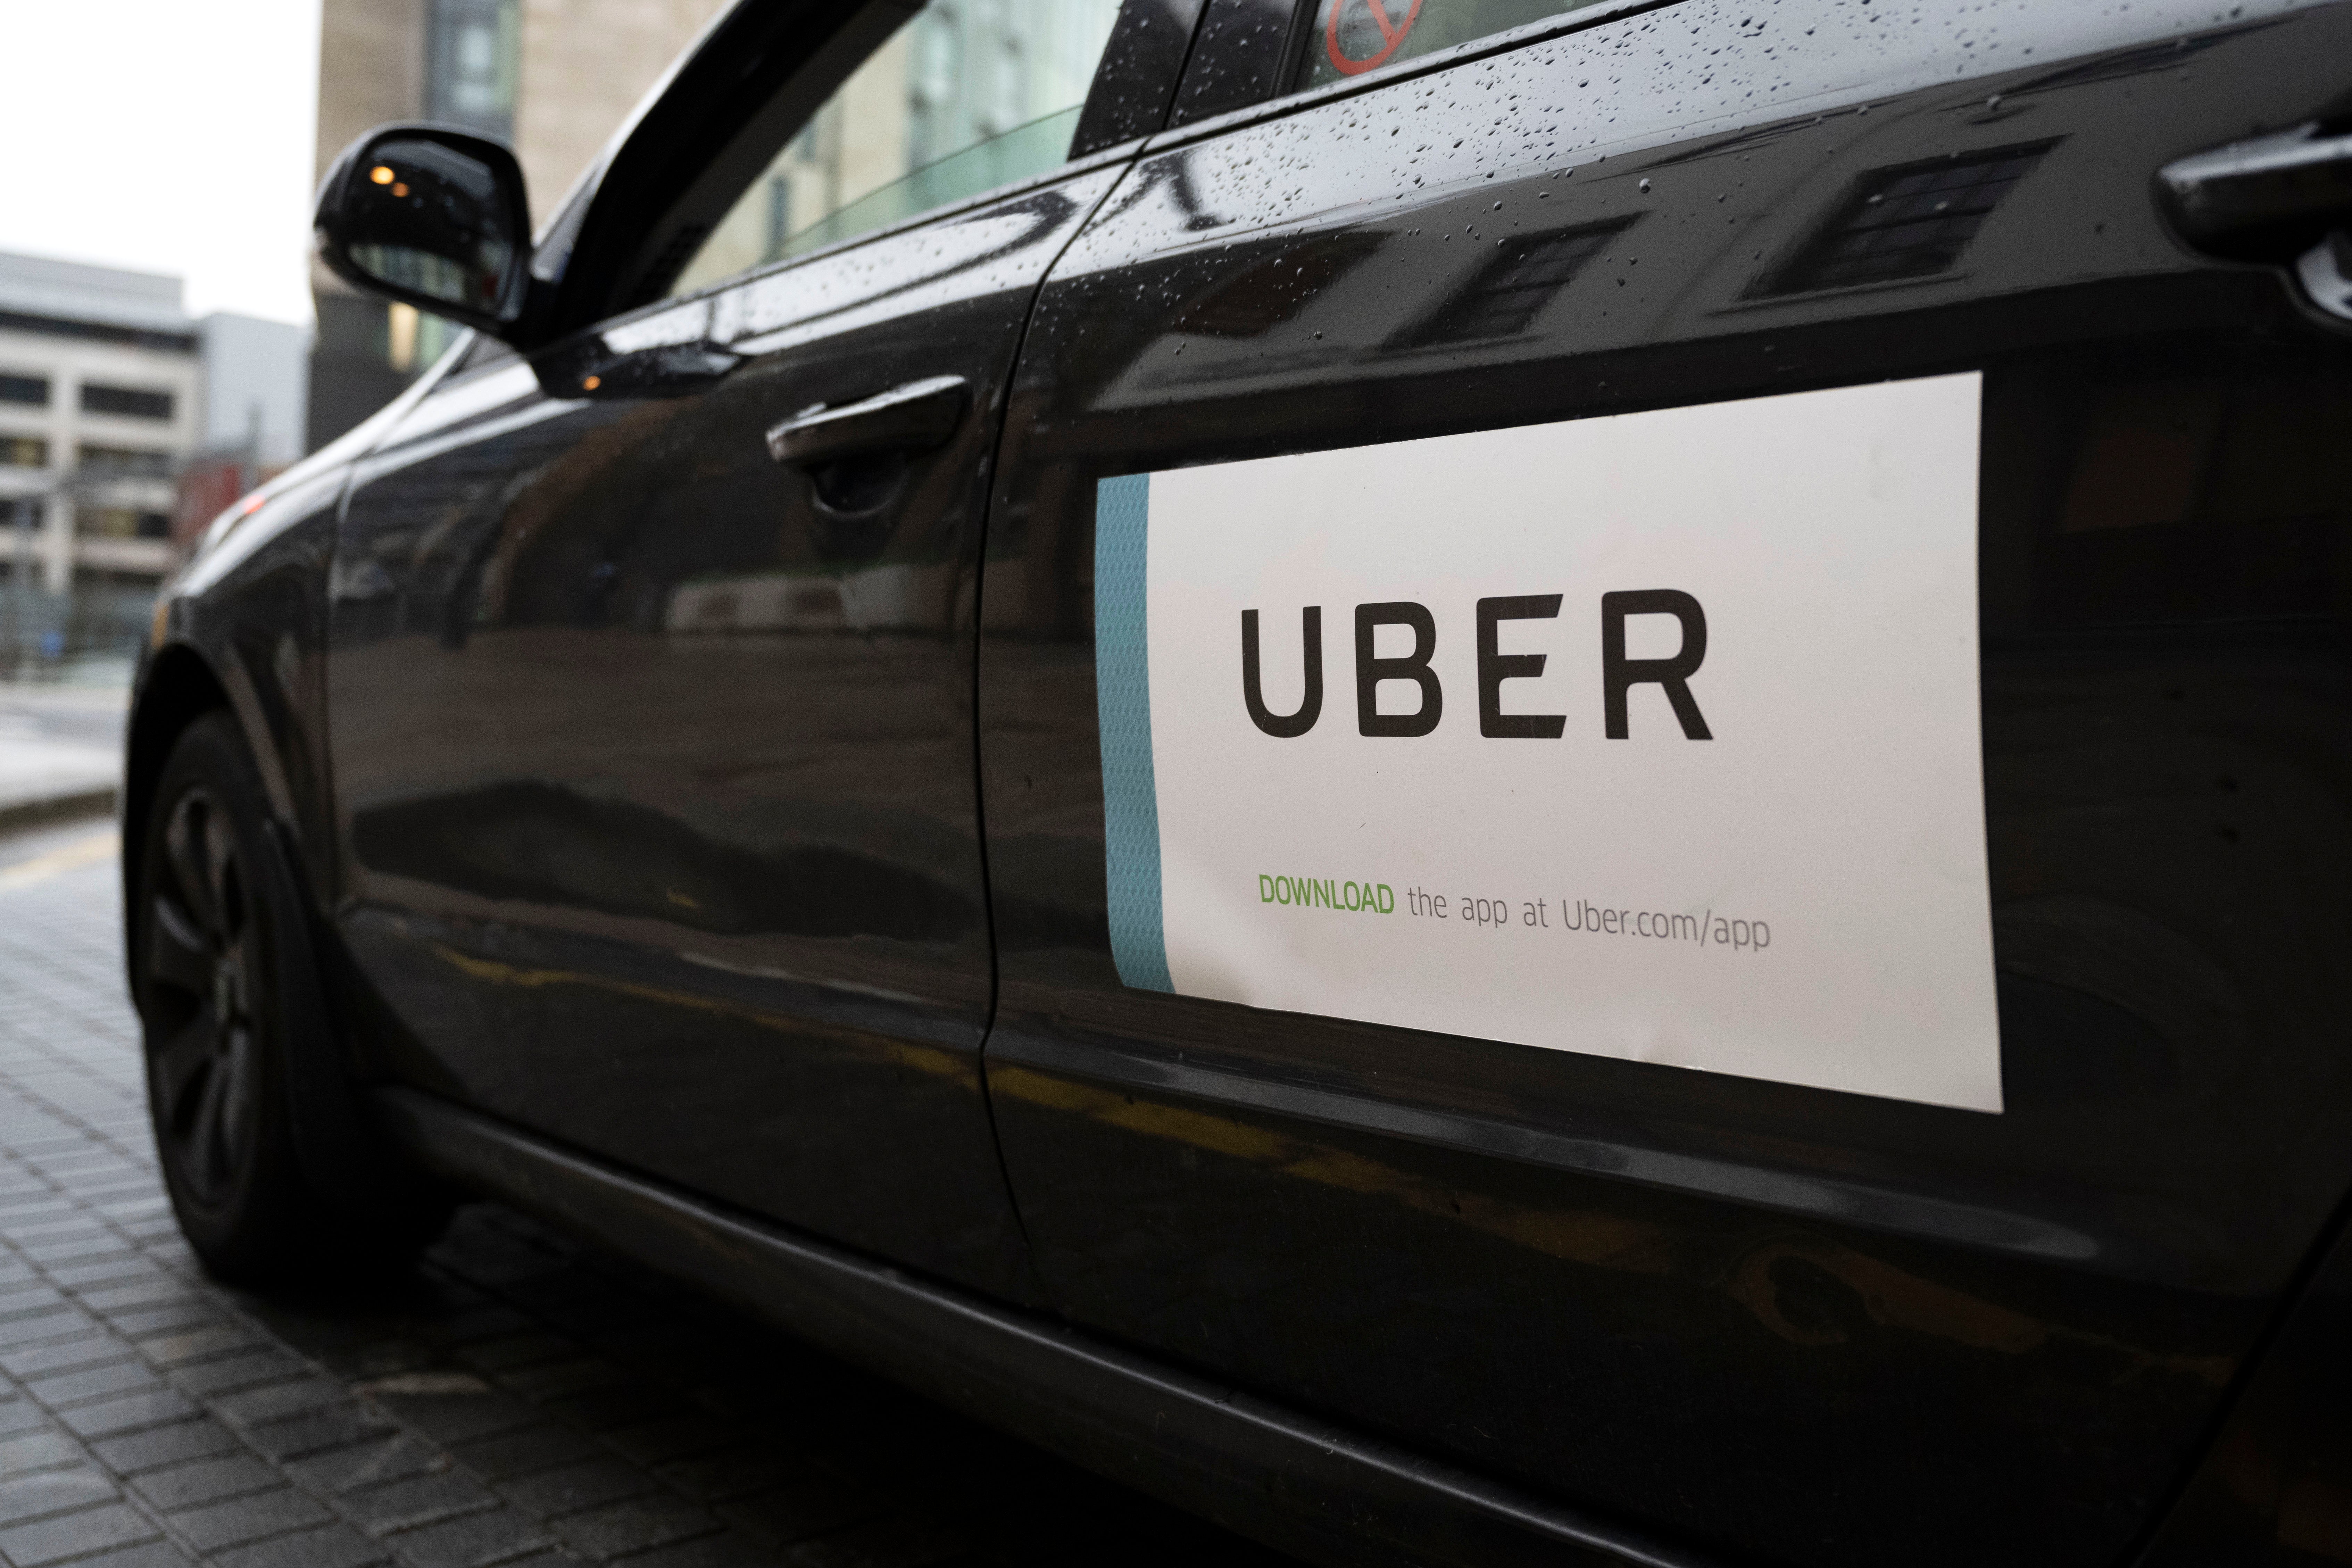 Uber said it will recruit 20,000 more drivers